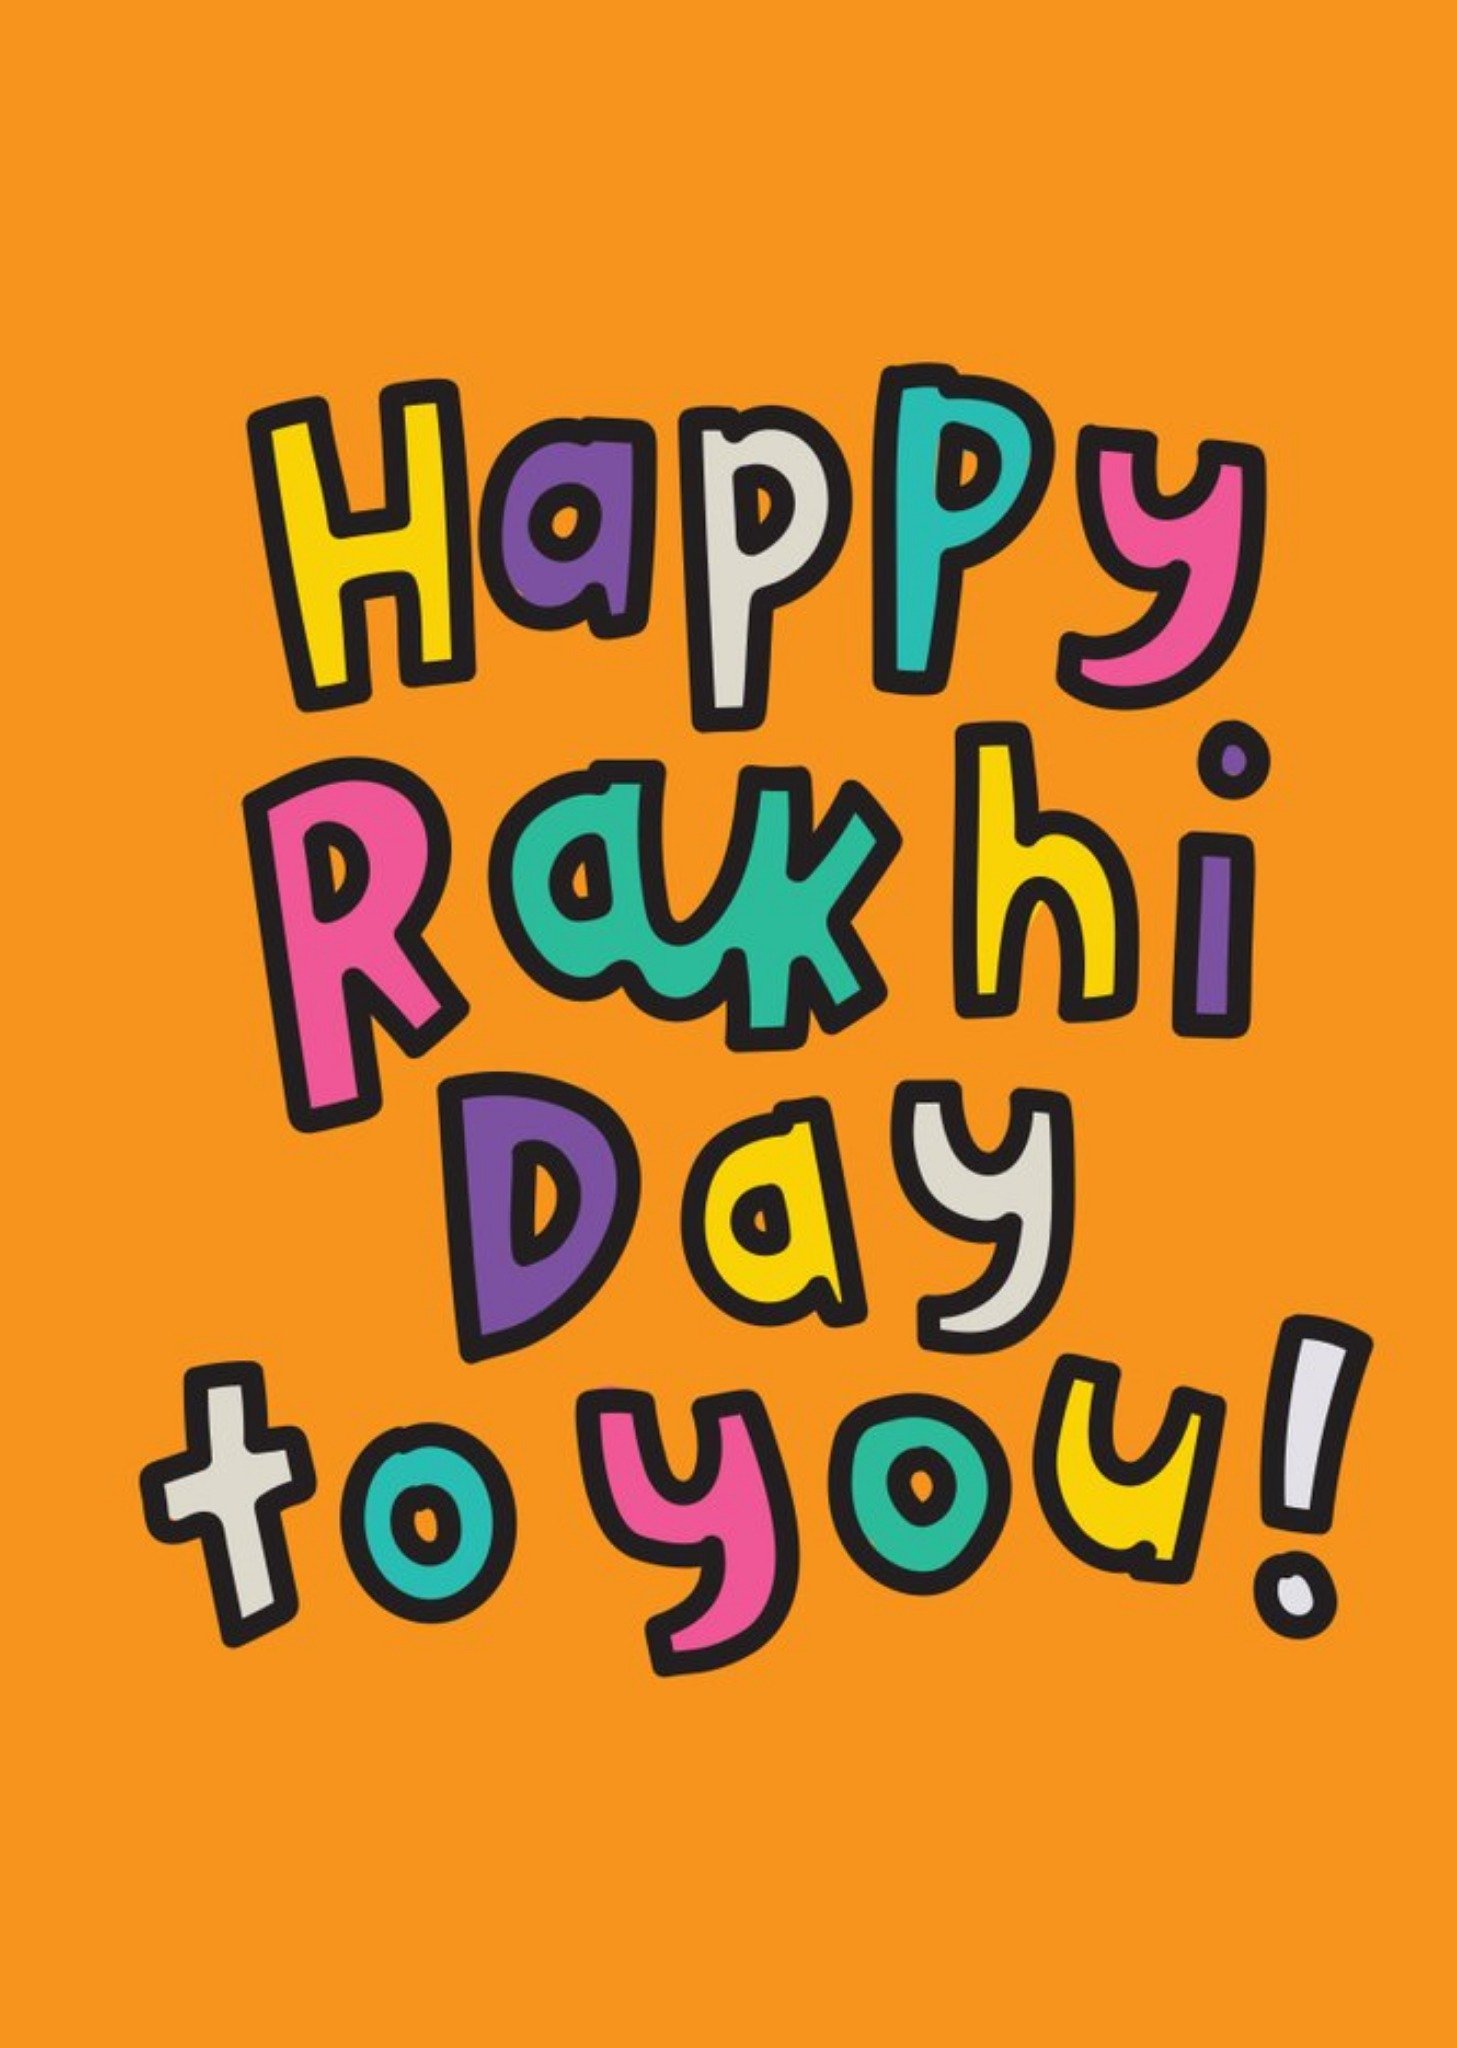 Moonpig The Playful Indian Bright Typographic Happy Rakhi Day To You Card Ecard